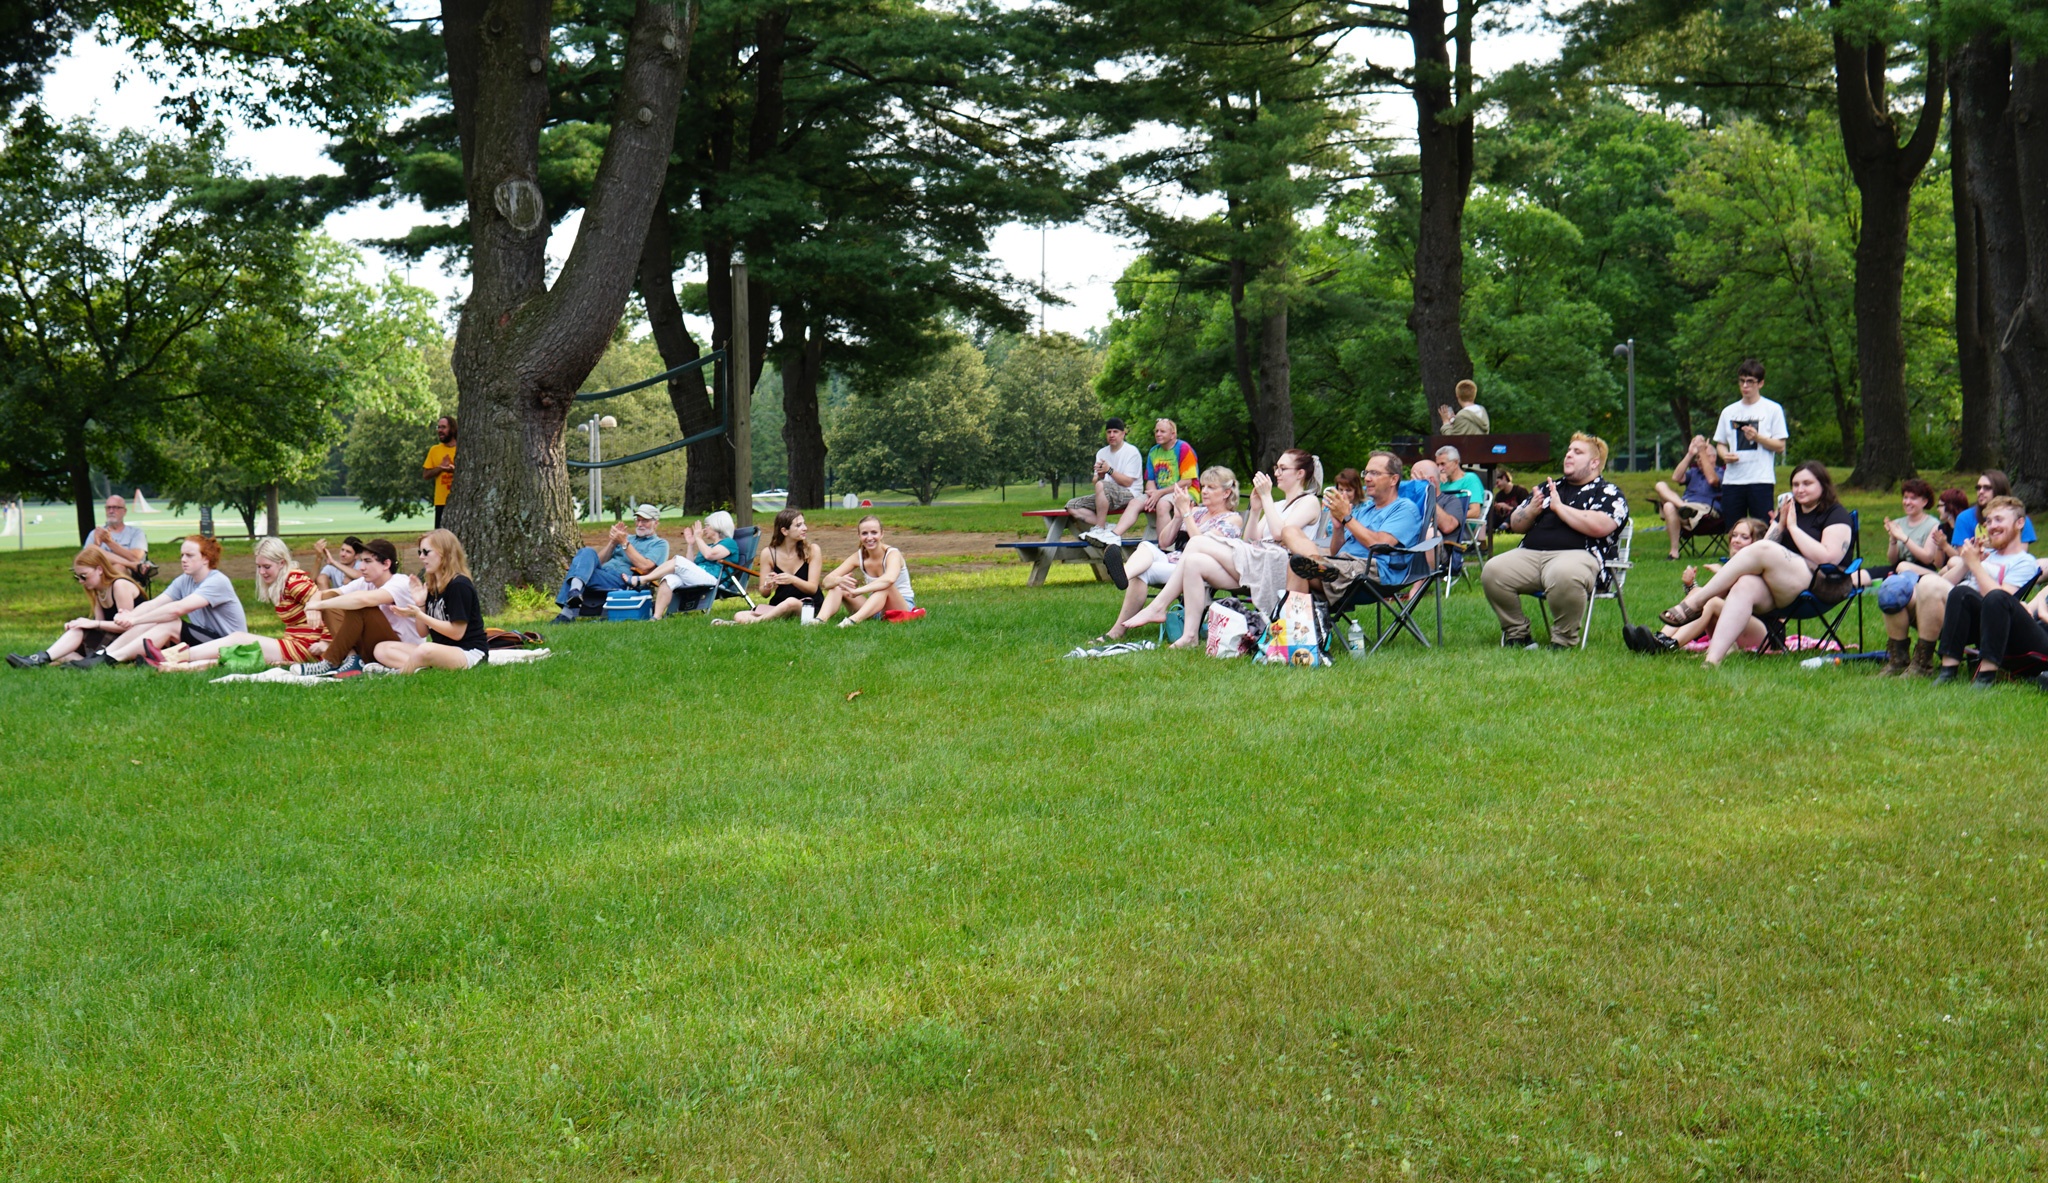 A crowd of people sit on a lawn with trees behind them, some on lawn chairs, others on blankets.